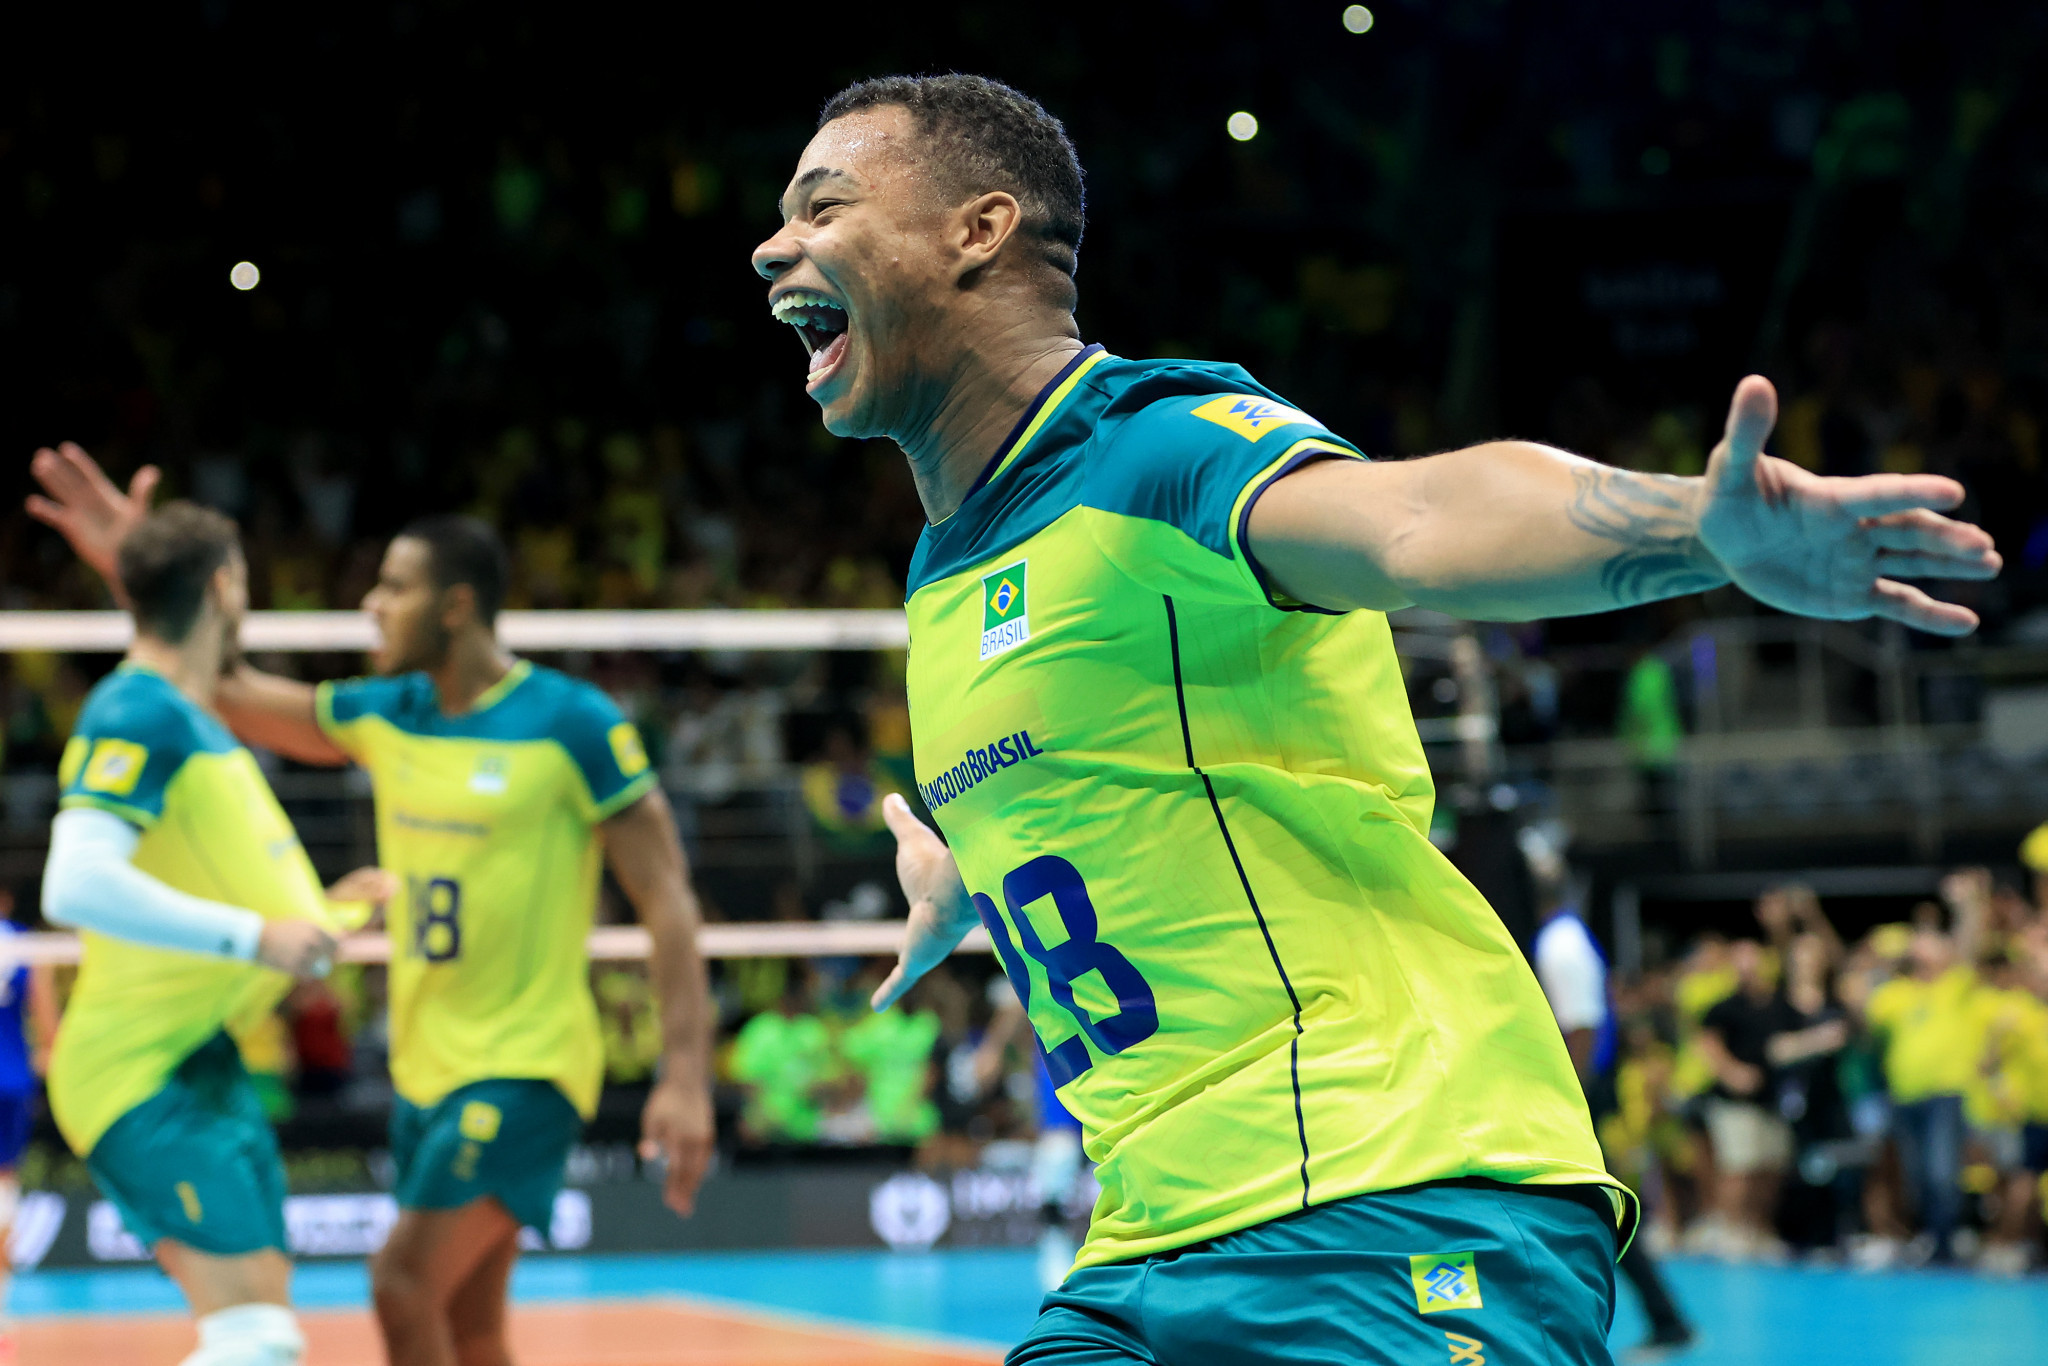 Brazil qualified after a thrilling last game win over world champions Italy ©Getty Images